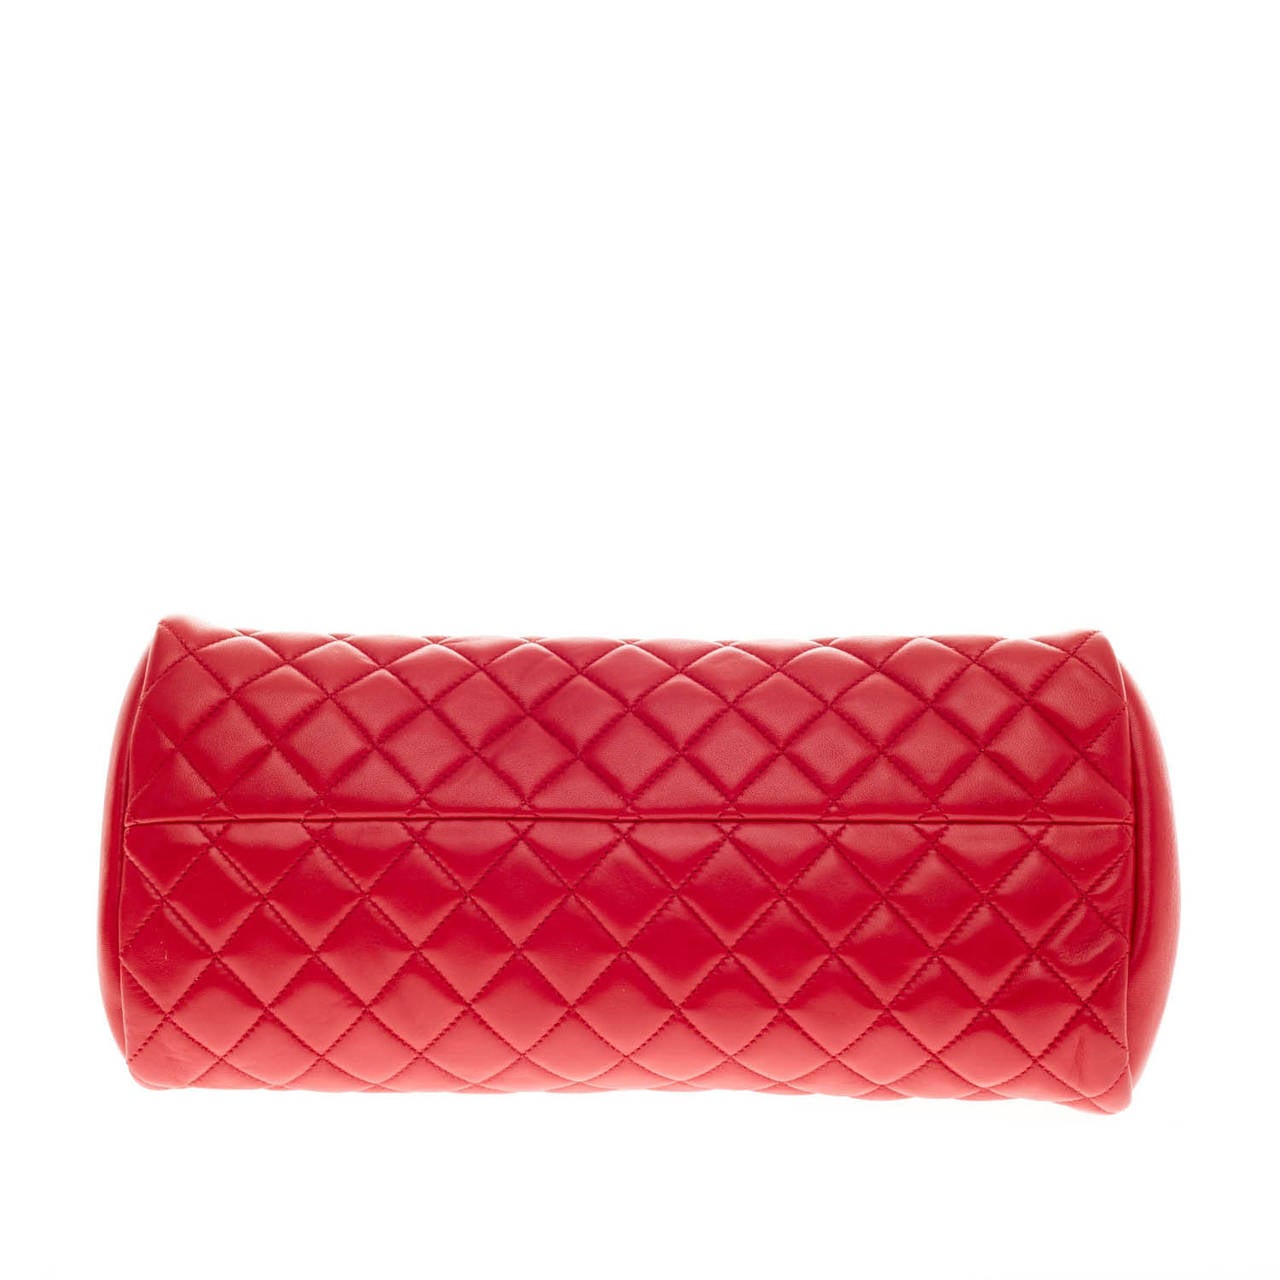 Chanel Just Mademoiselle Quilted Leather Medium 1